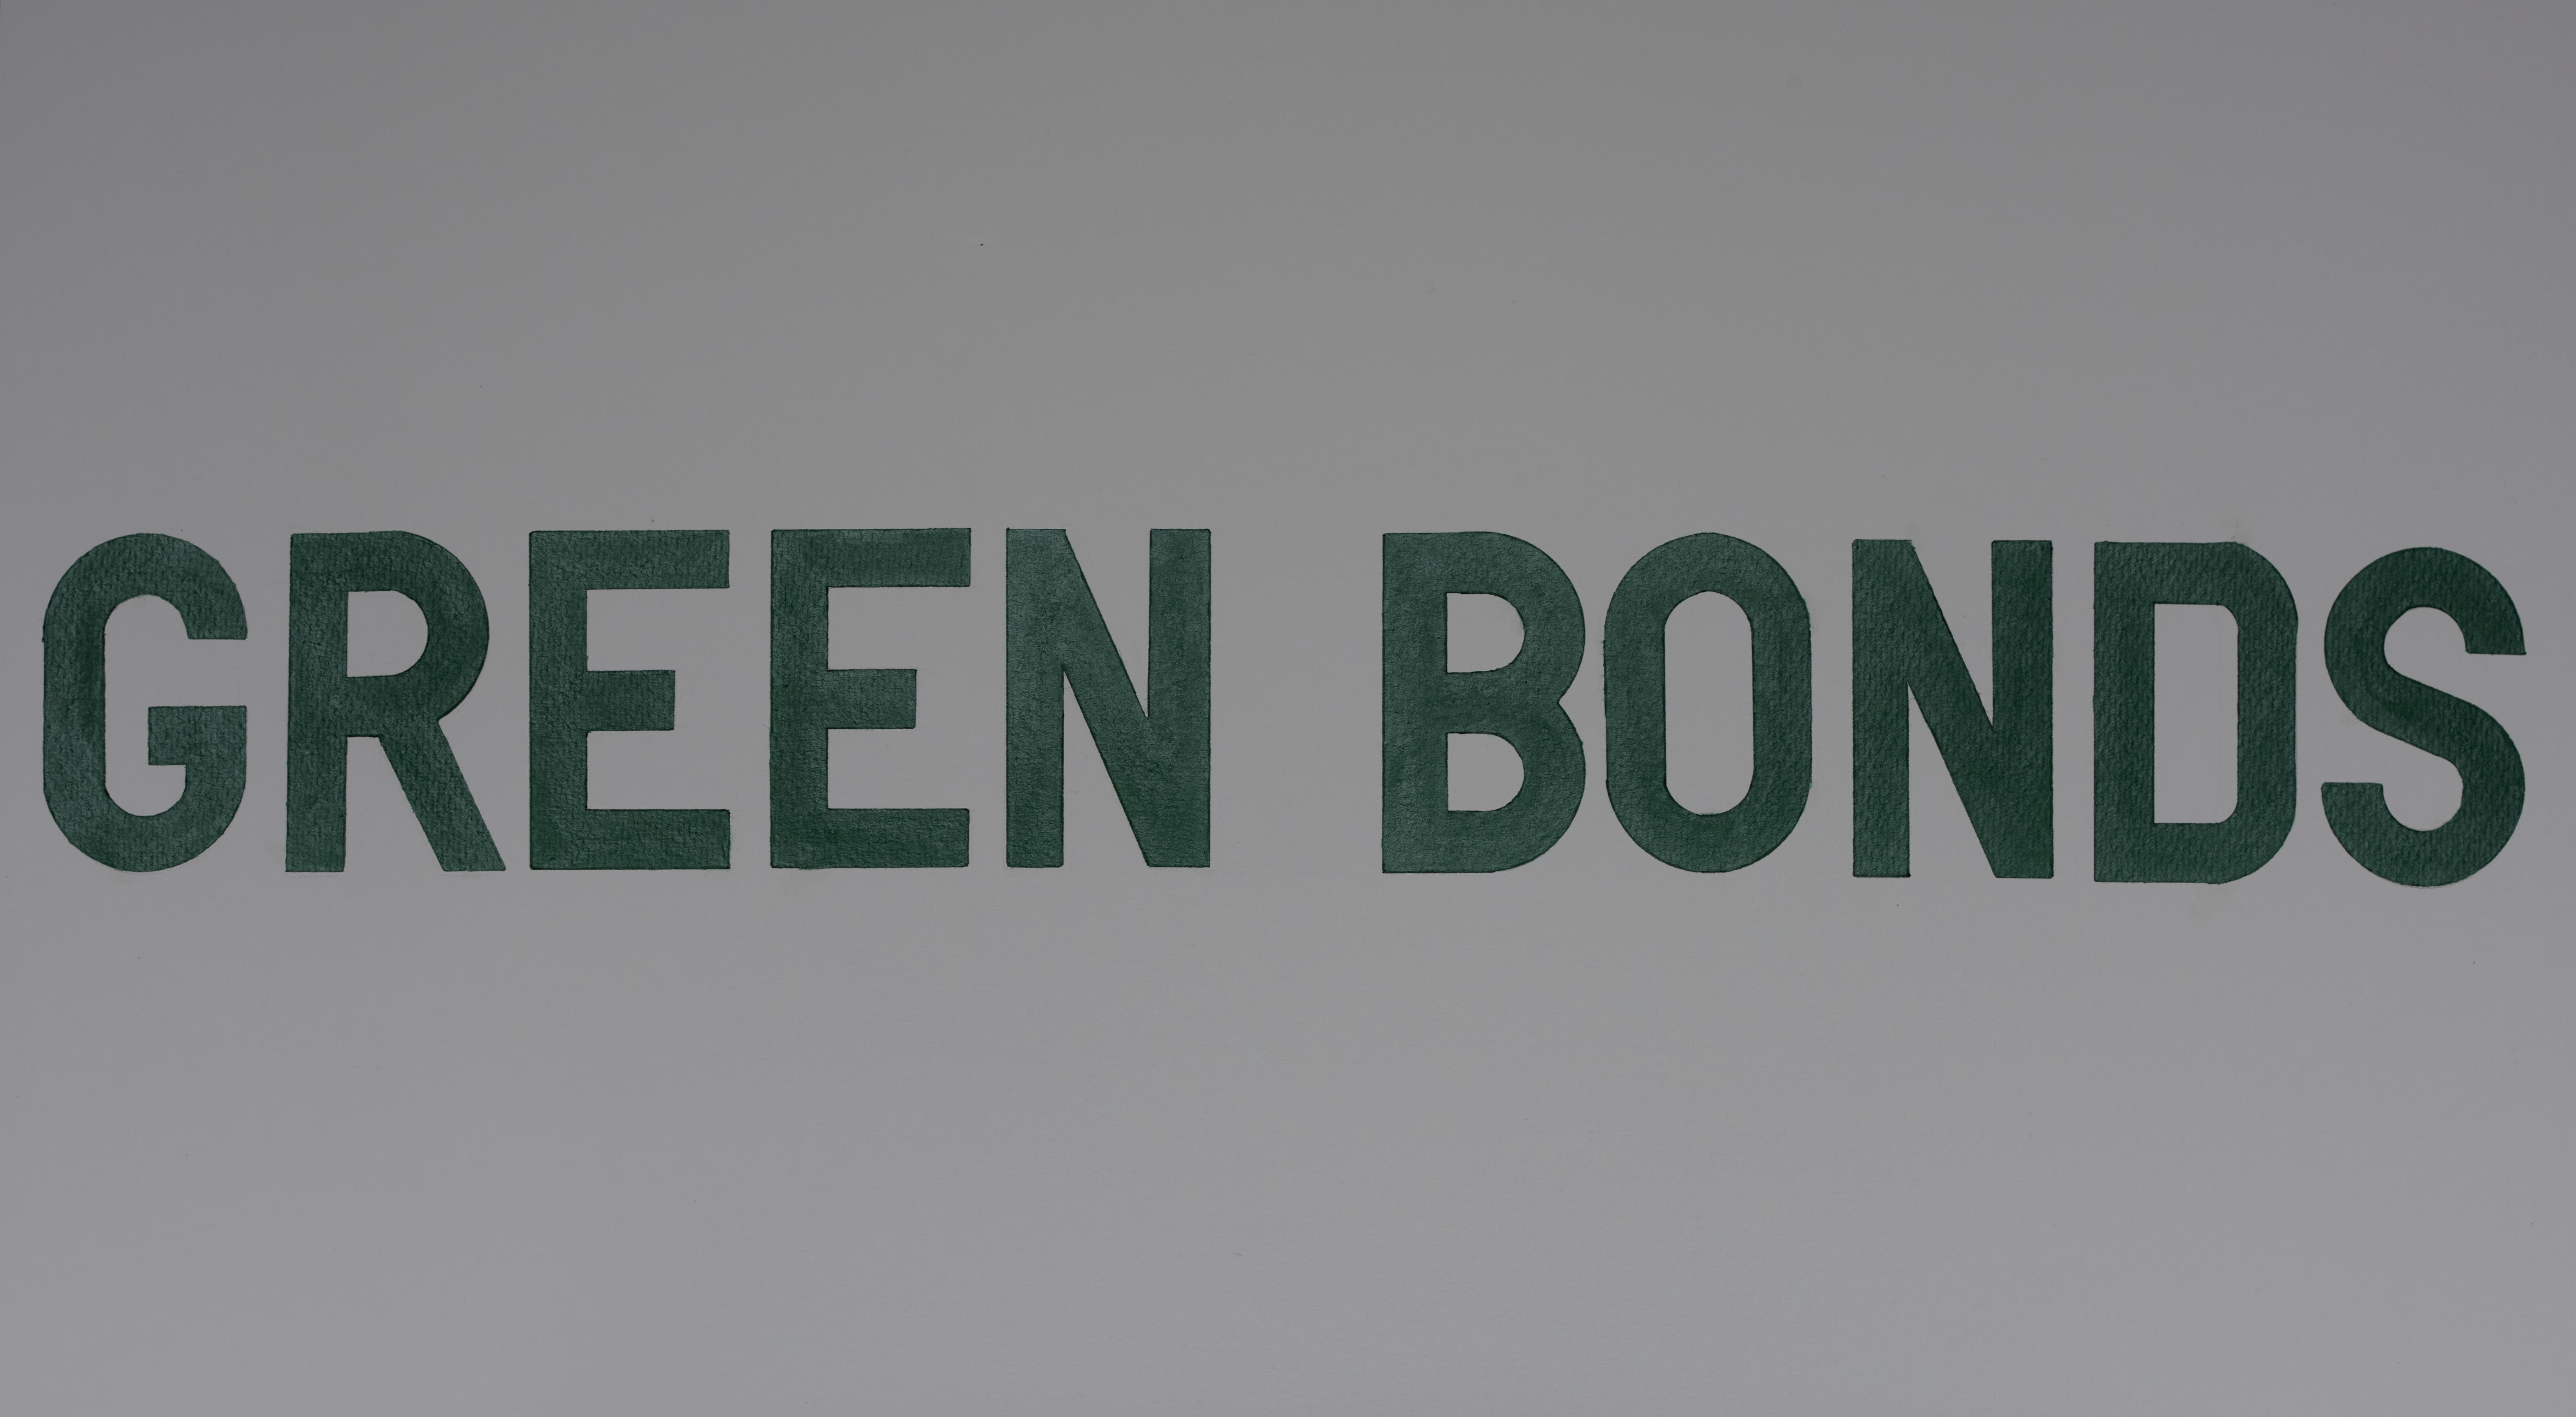 Green Bonds, 2020. Pen and acrylic on Paper, 44 x 76 cm 